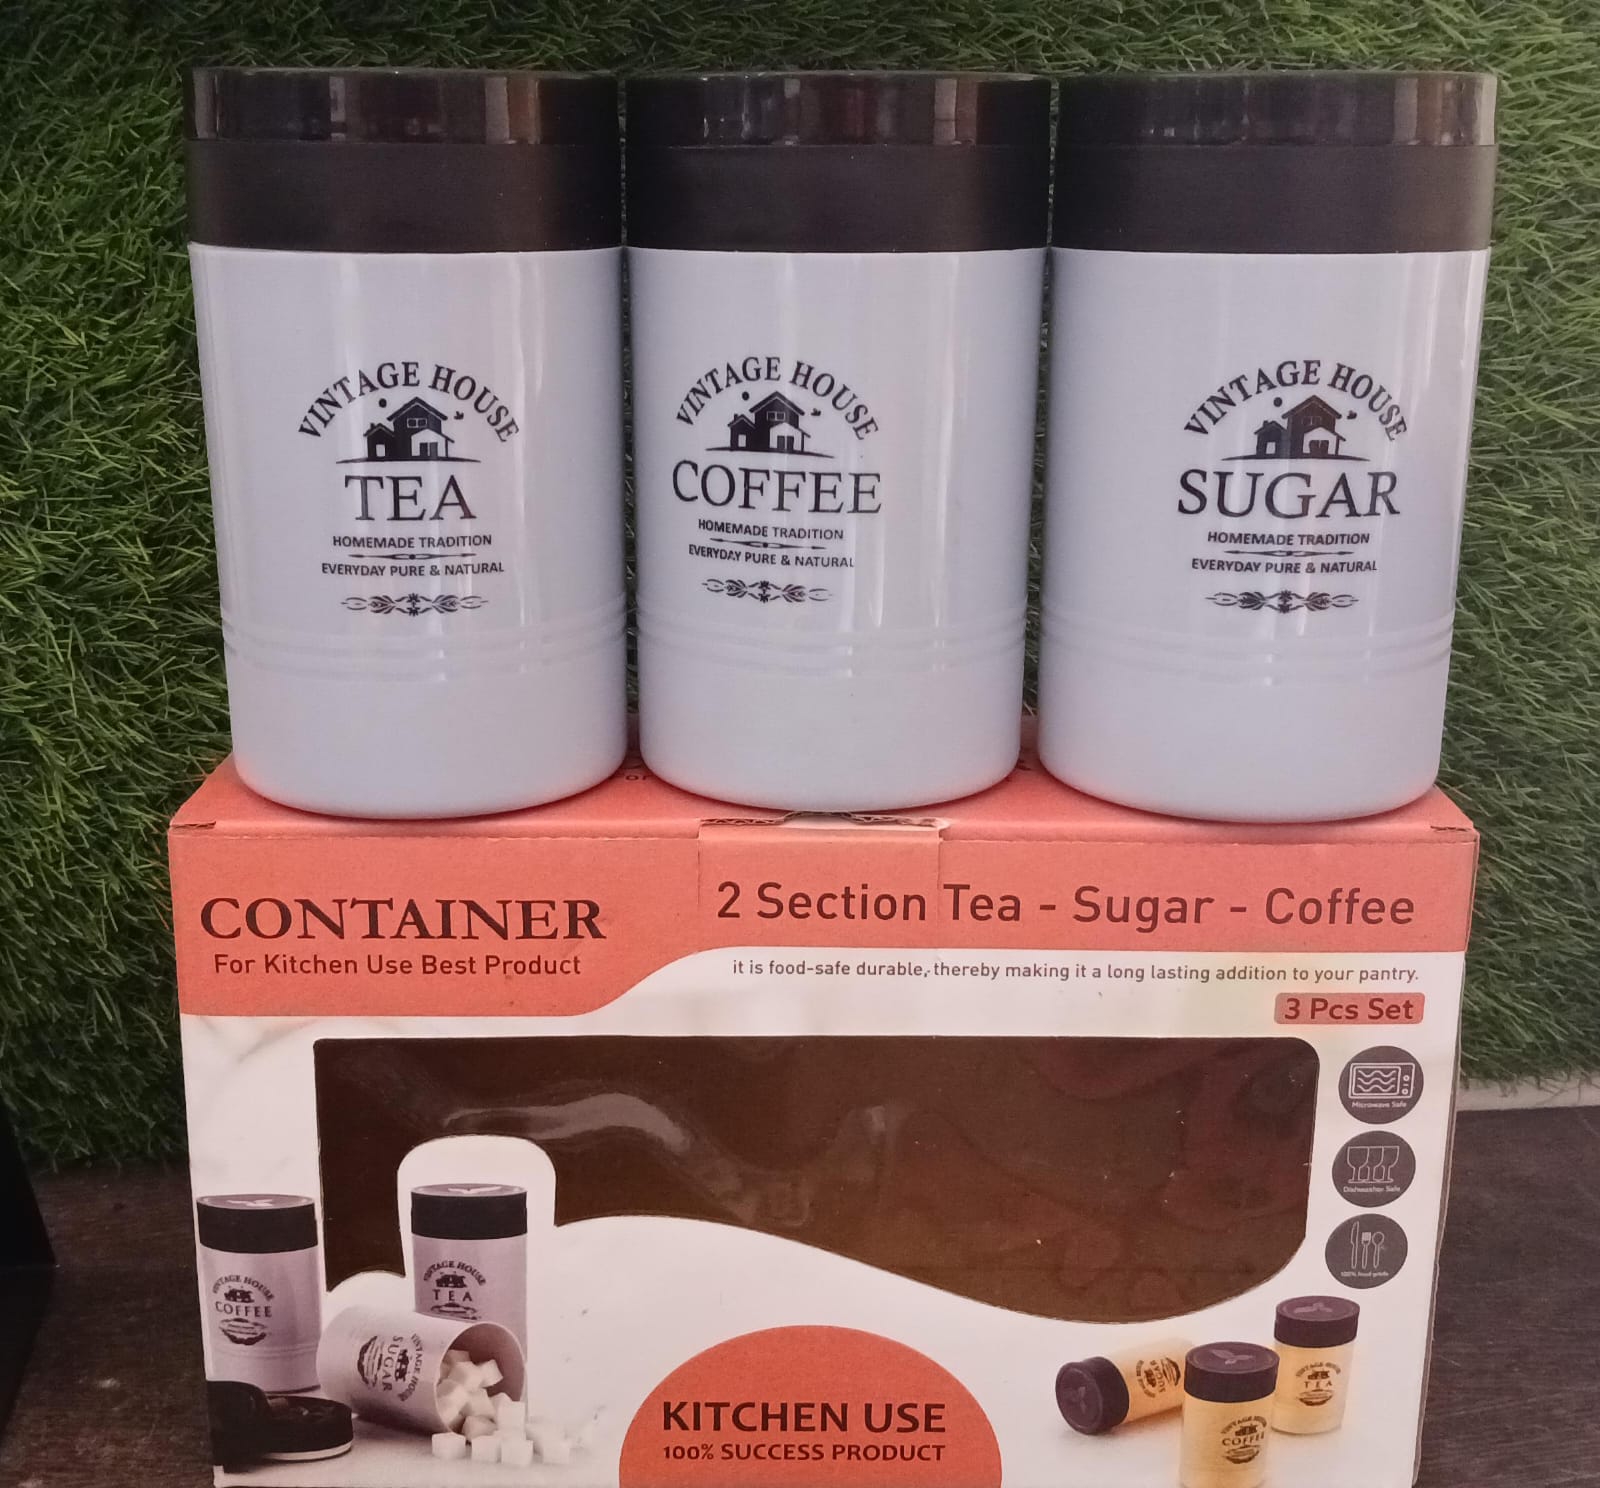 5736 Accurate Seal Tea Sugar Coffee Container - 3 Pcs Plastic Damru Shaped Tea, Coffee, Sugar Canisters Jar, New Airtight Food Seal Containers for Salt, Dry Fruit, Grocery Multicolor (3 Pcs Set)